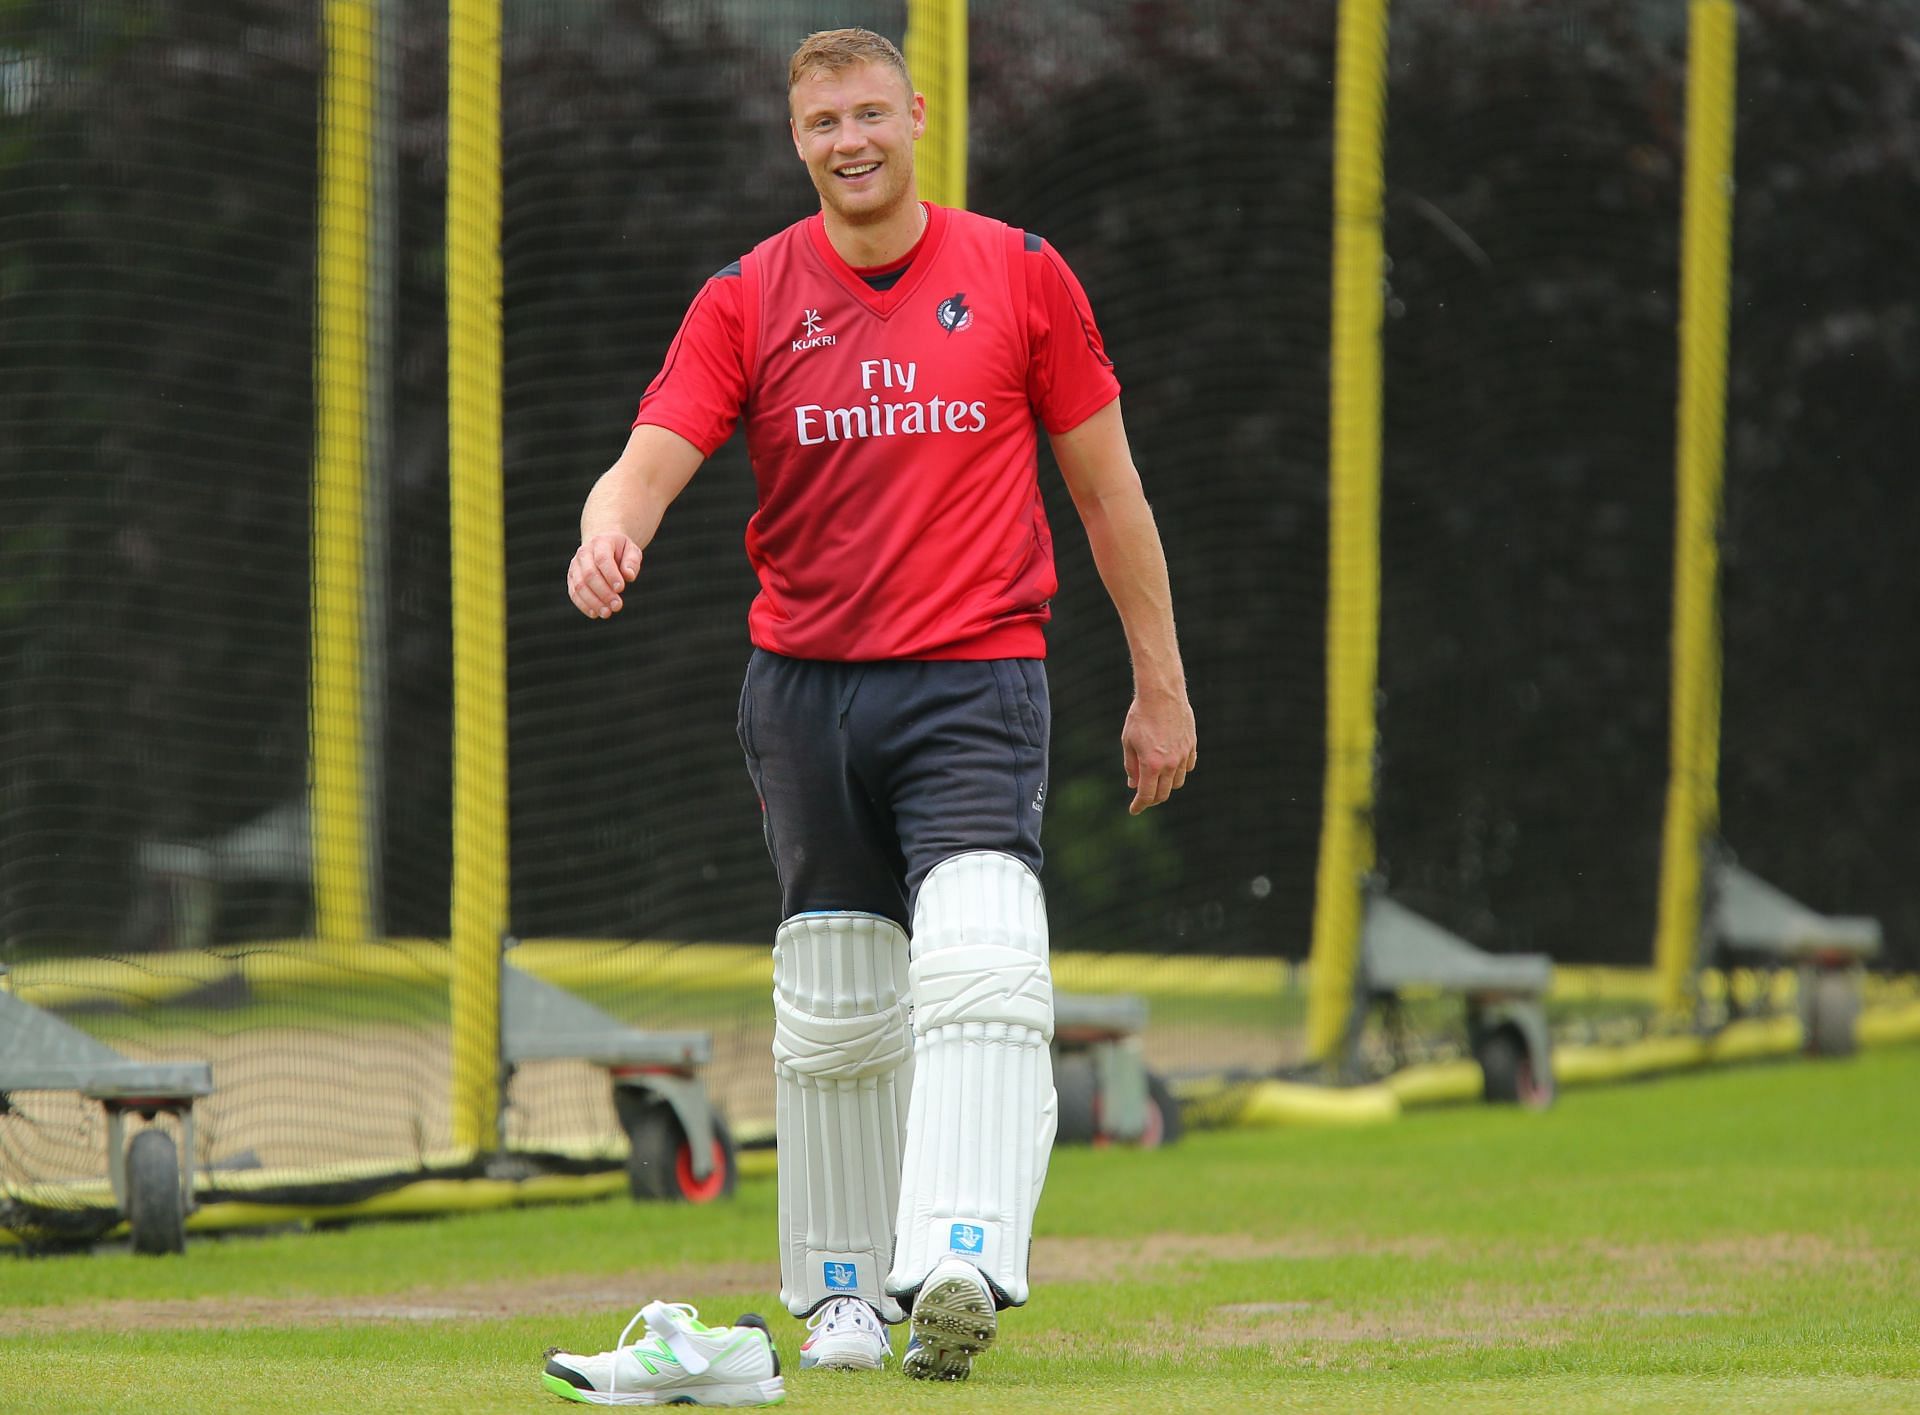 Andrew Flintoff played for the Chennai Super Kings in 2008